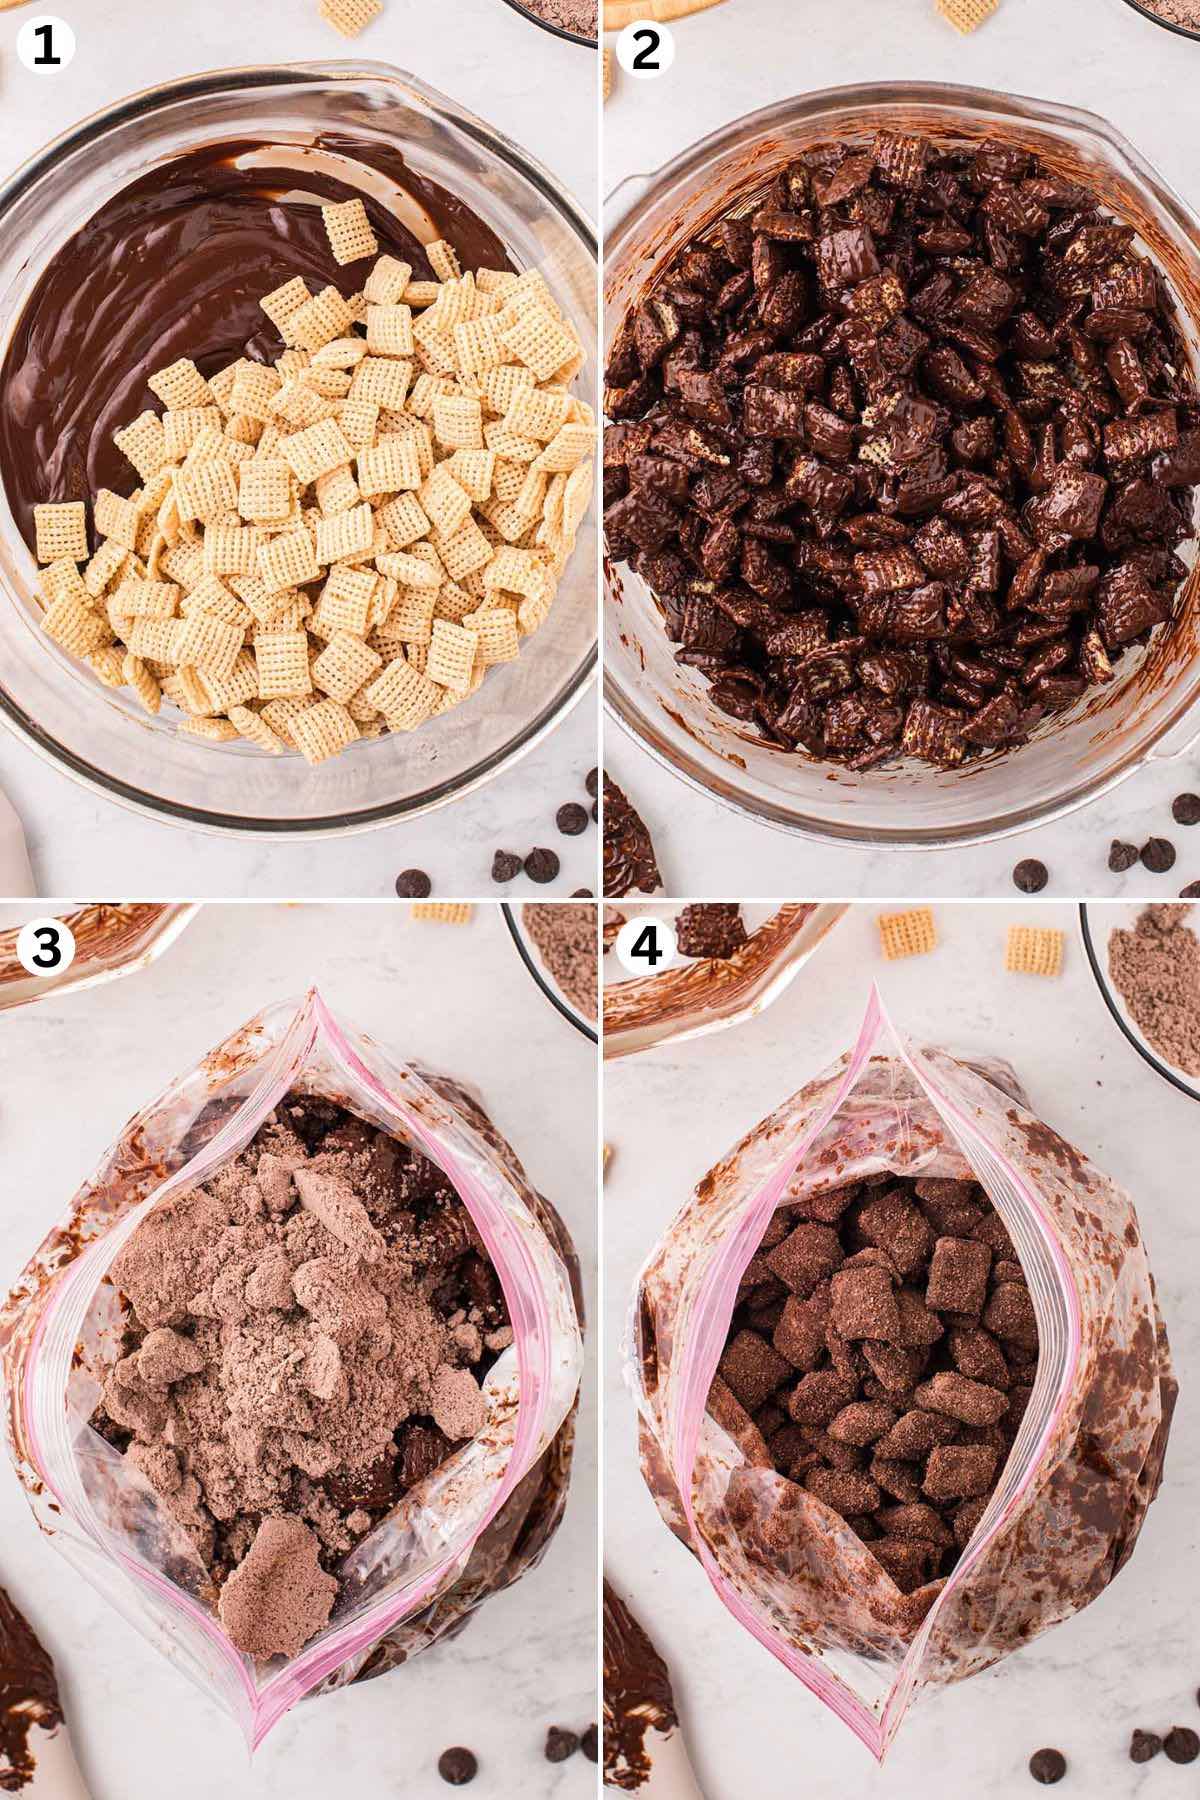 Add the Rice Chex into the brownie mixture and mix well. Put it in a sealable plastic bag. Shake the bag well until Chex mixture is completely coated.